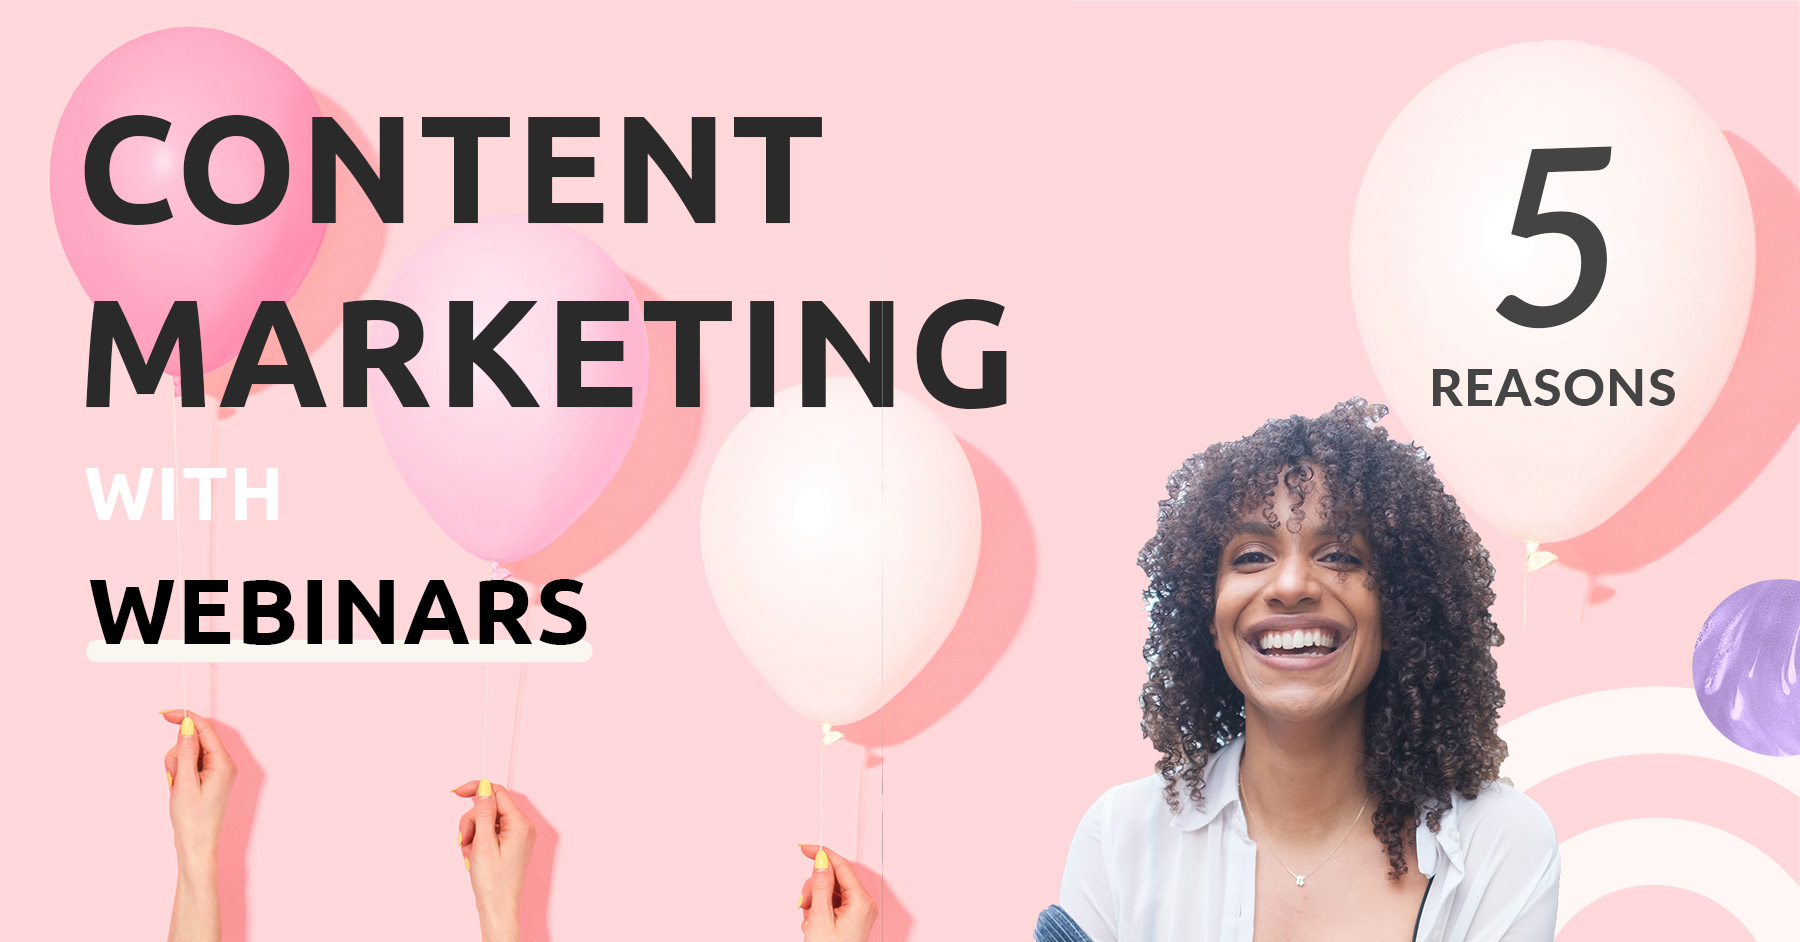 You already know by now that webinars are a crucial part, or should be a crucial part of your content marketing strategy as a brand. In this article, we will explore the top 5 reasons why you should use webinars as one of the driving forces behind your content marketing efforts. Let’s dive in!
